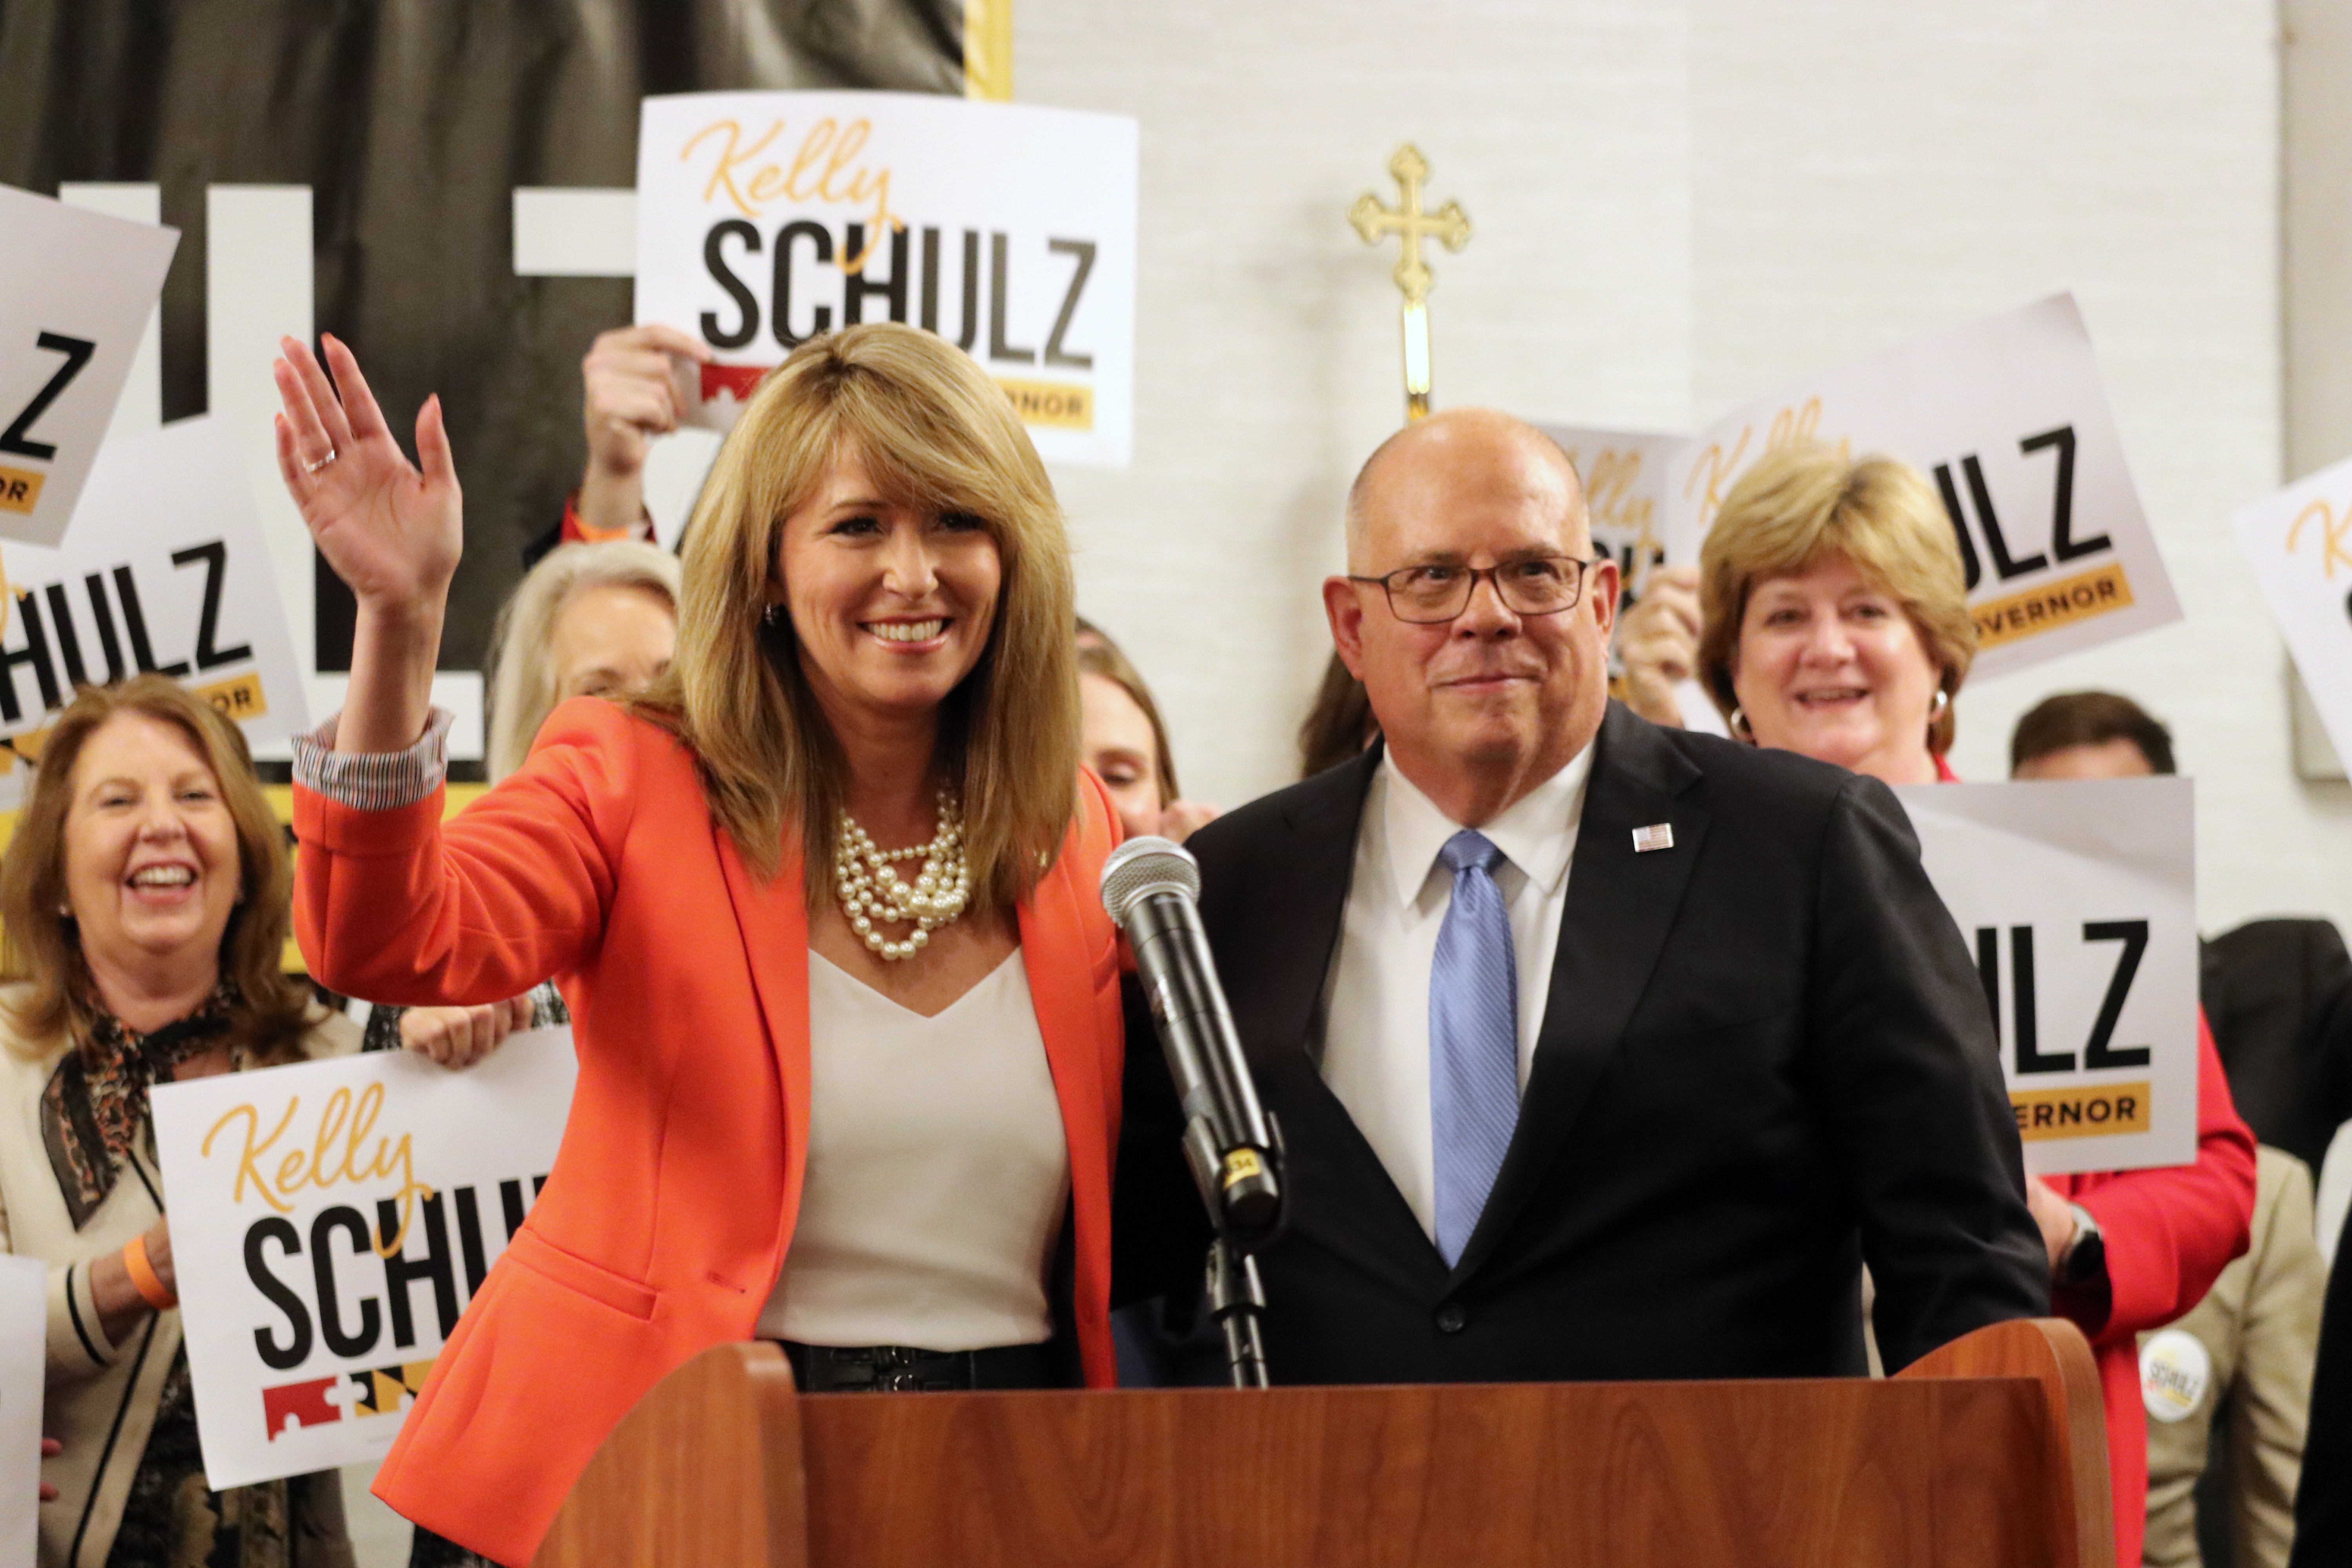 Kelly Schulz and Governor Larry Hogan at a campaign event together. 